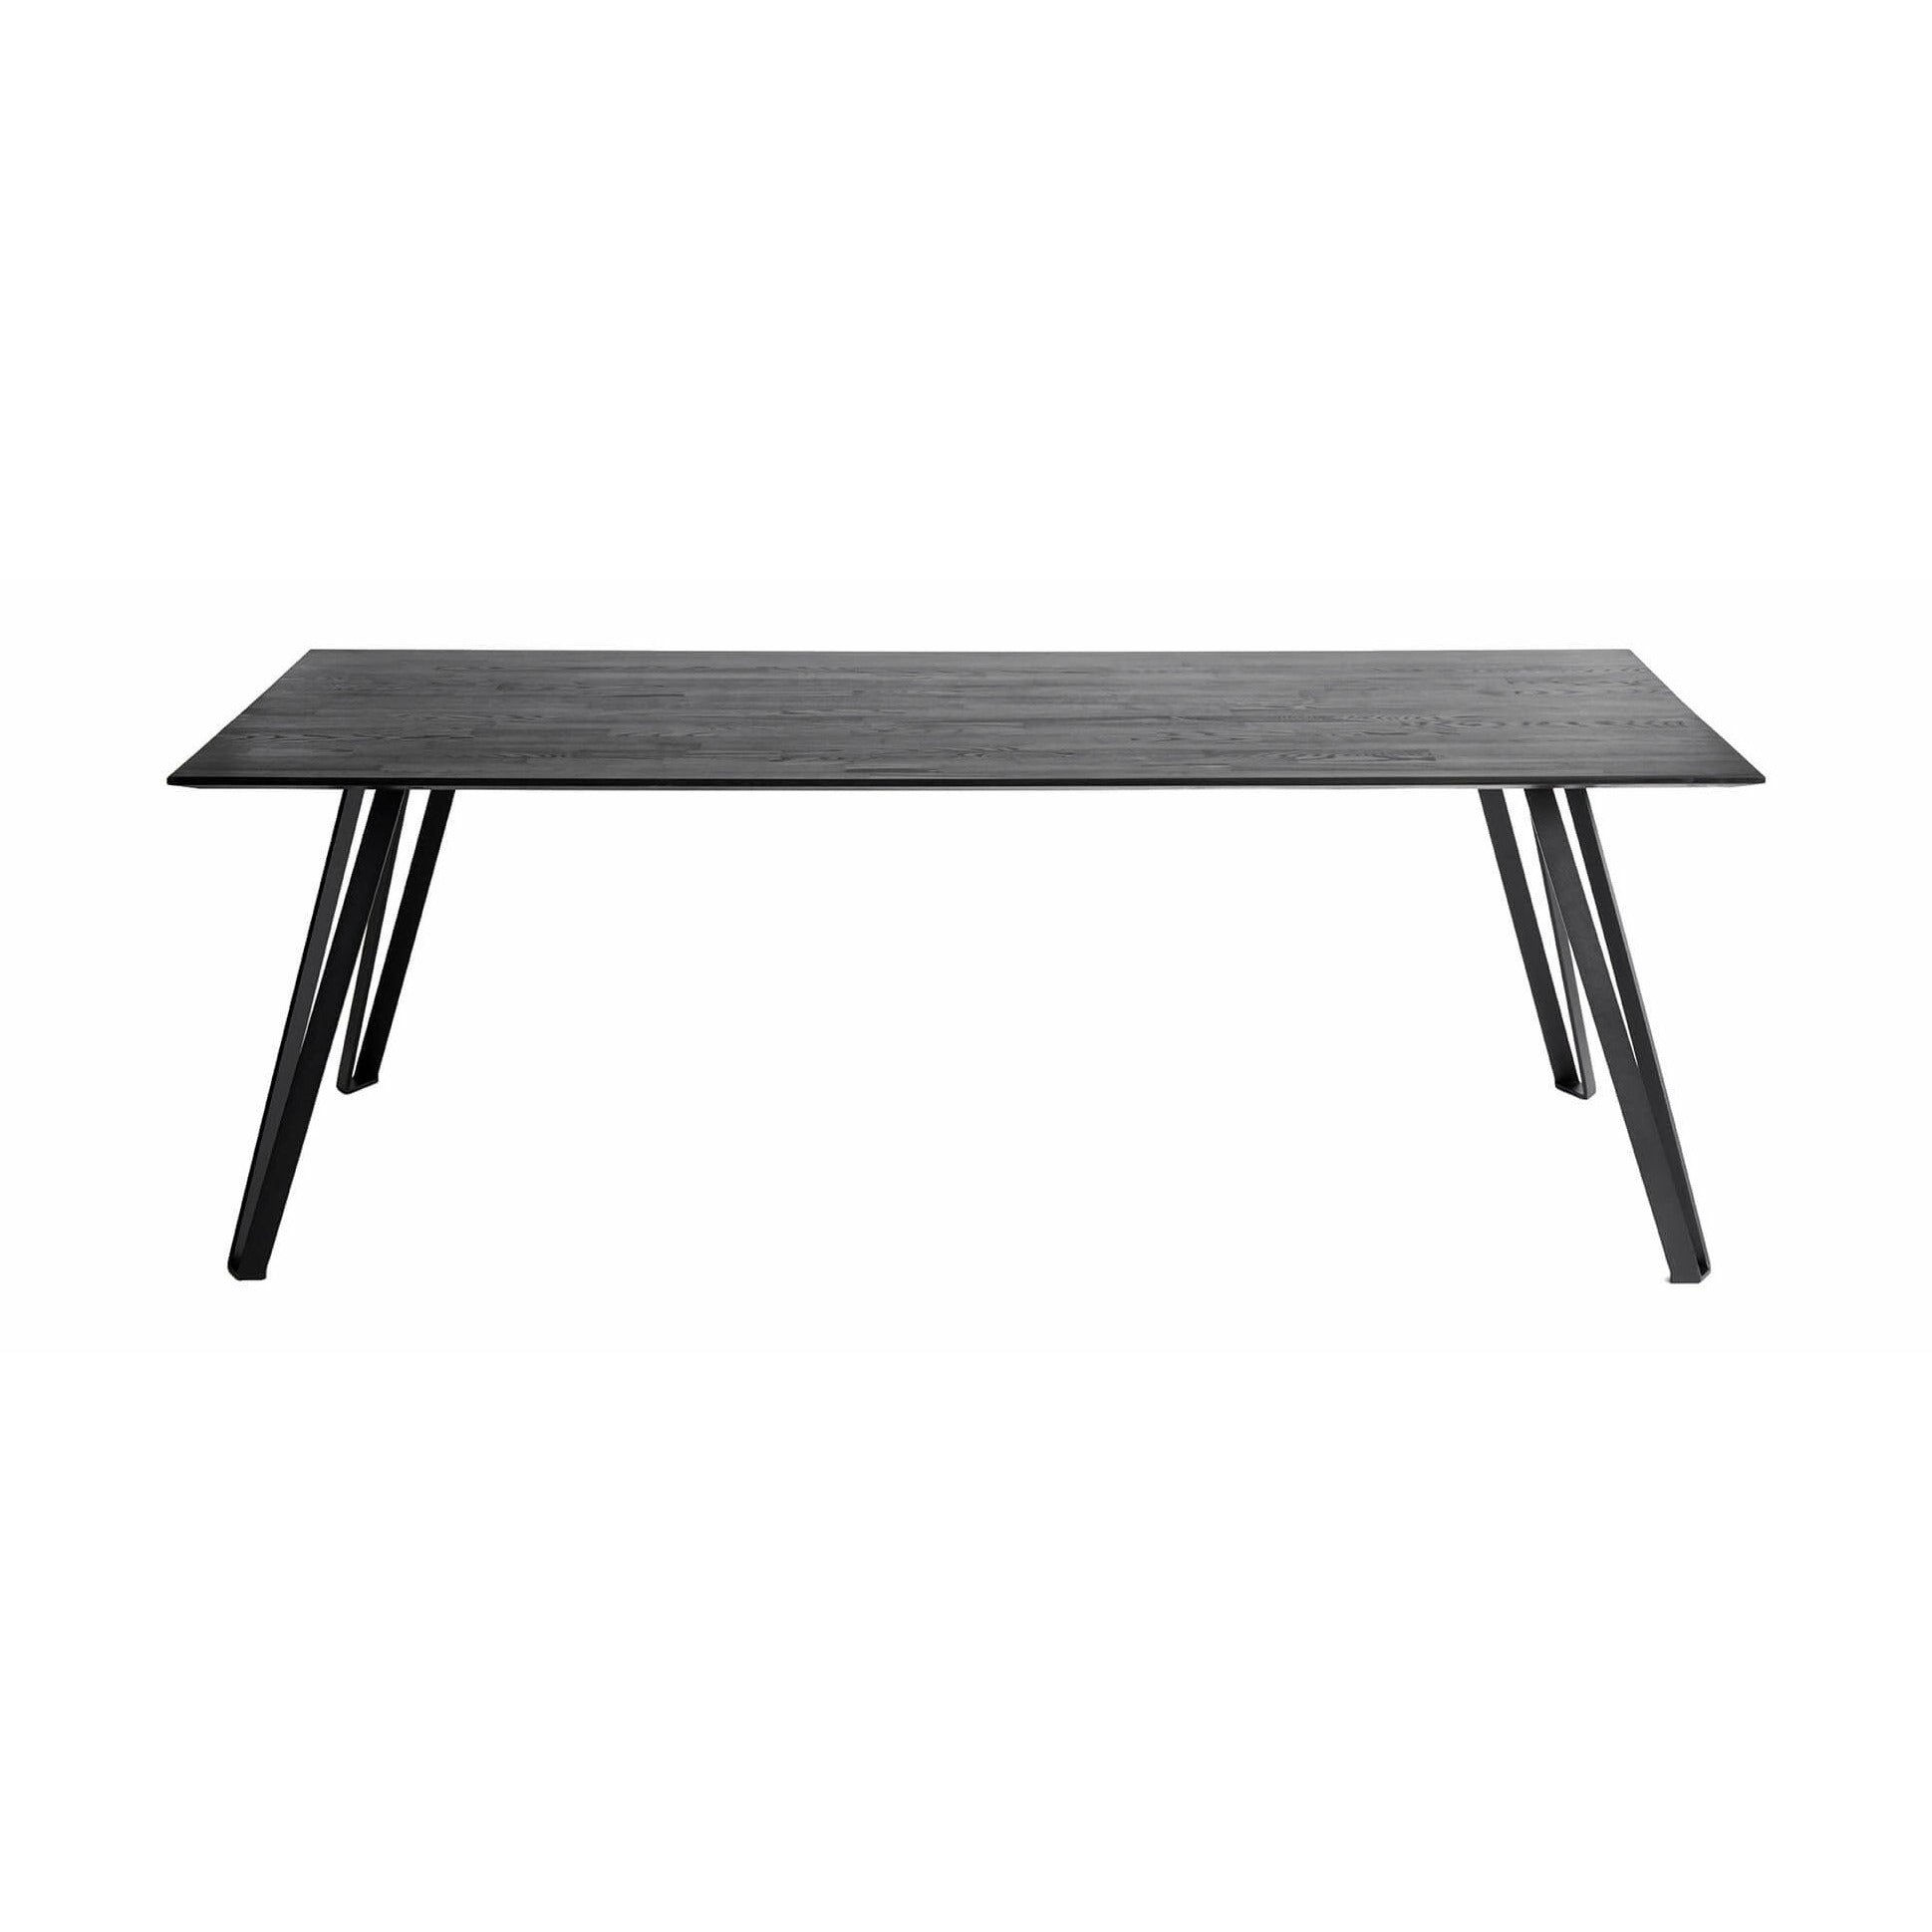 Muubs Space Dining Table Black, 220cm